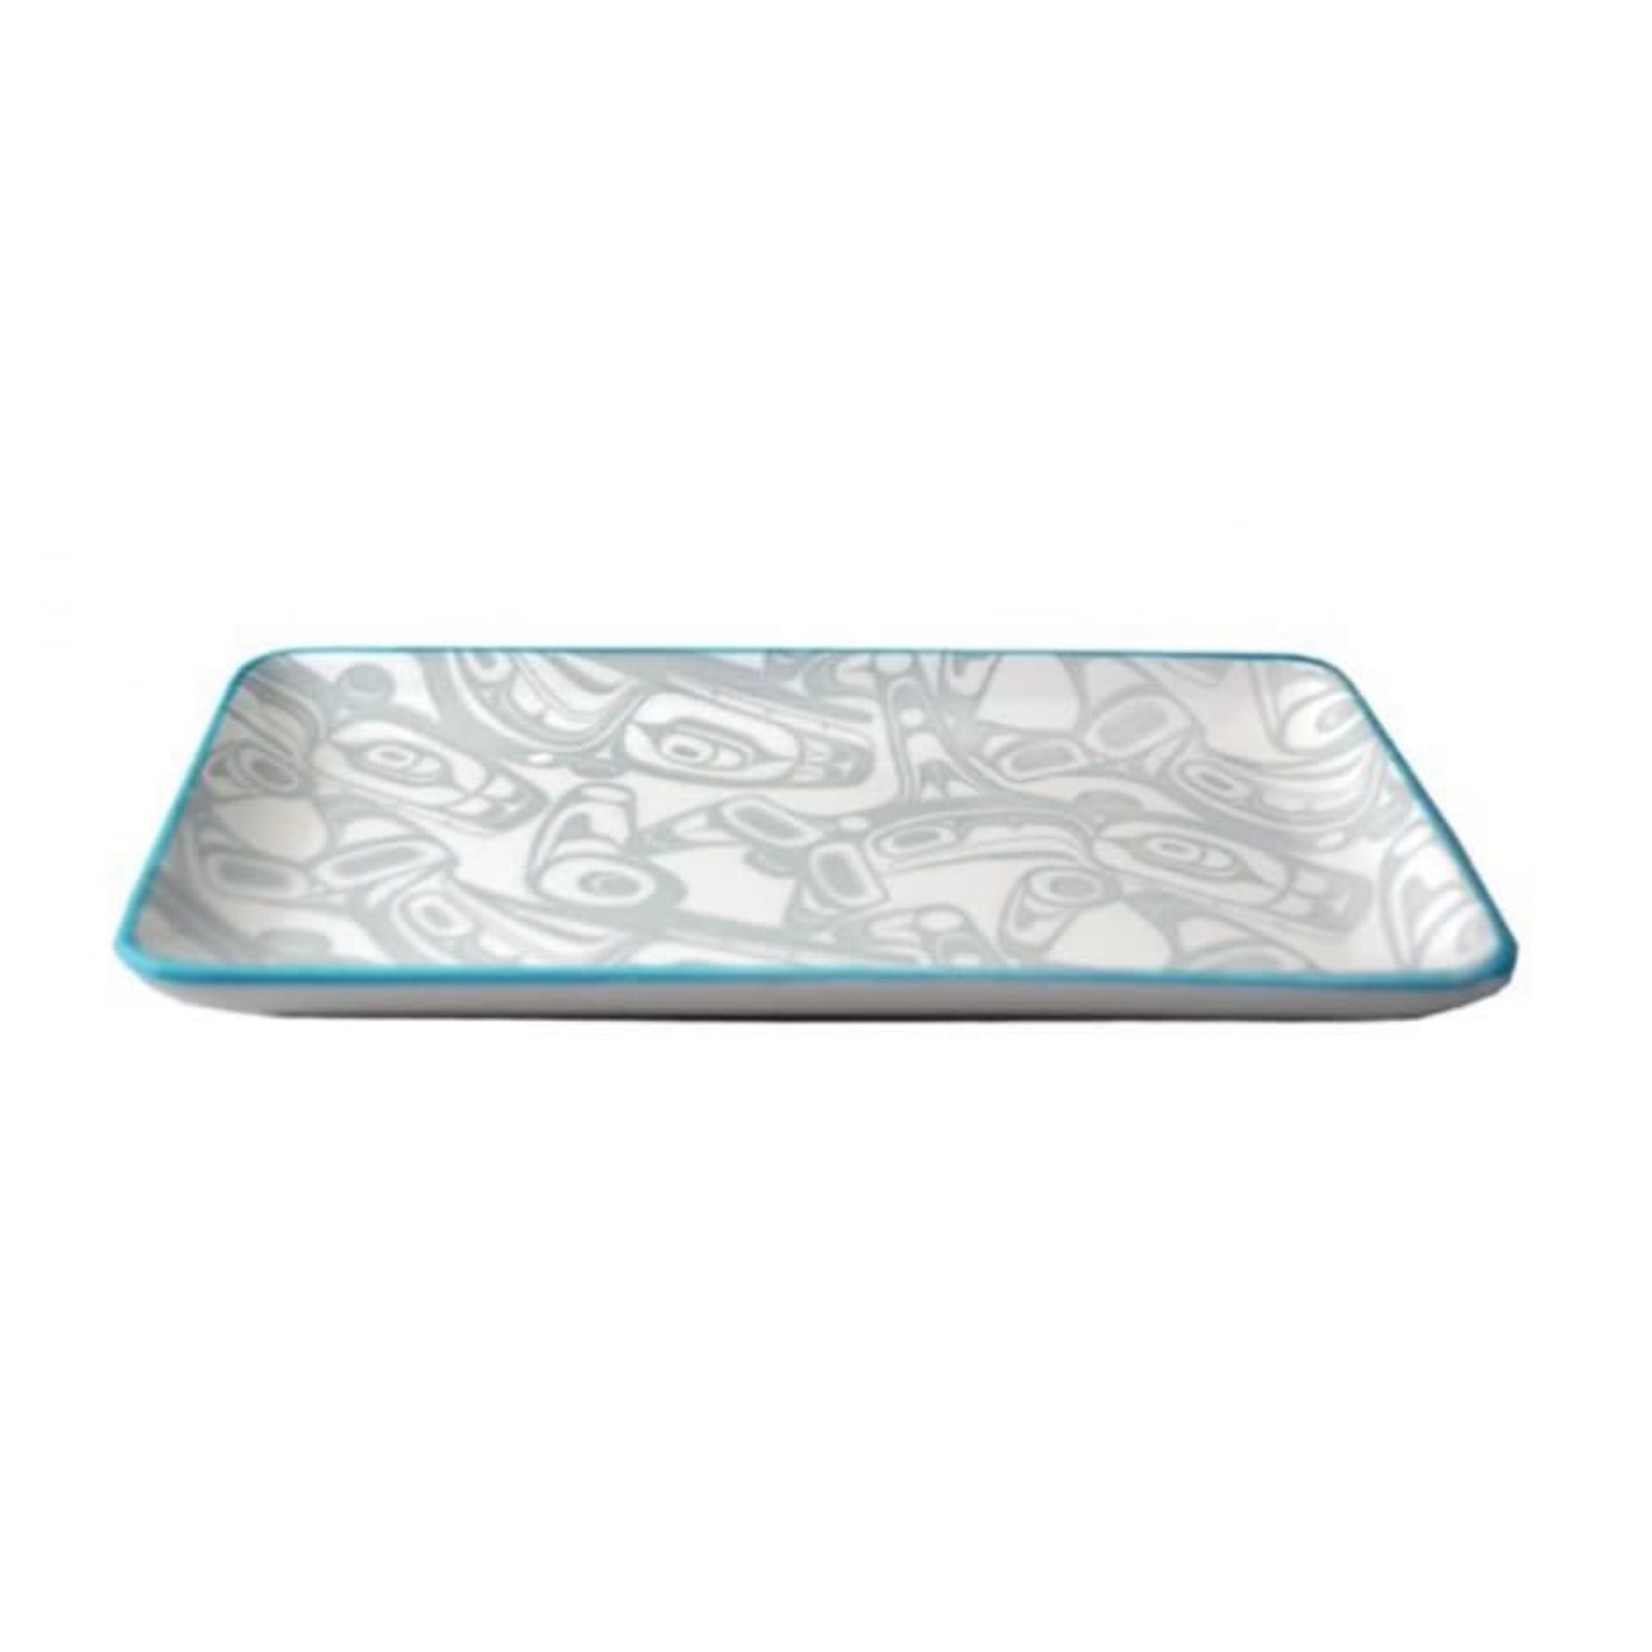 PANABO KELLY ROBINSON Orca Platter - Turquoise / Grey